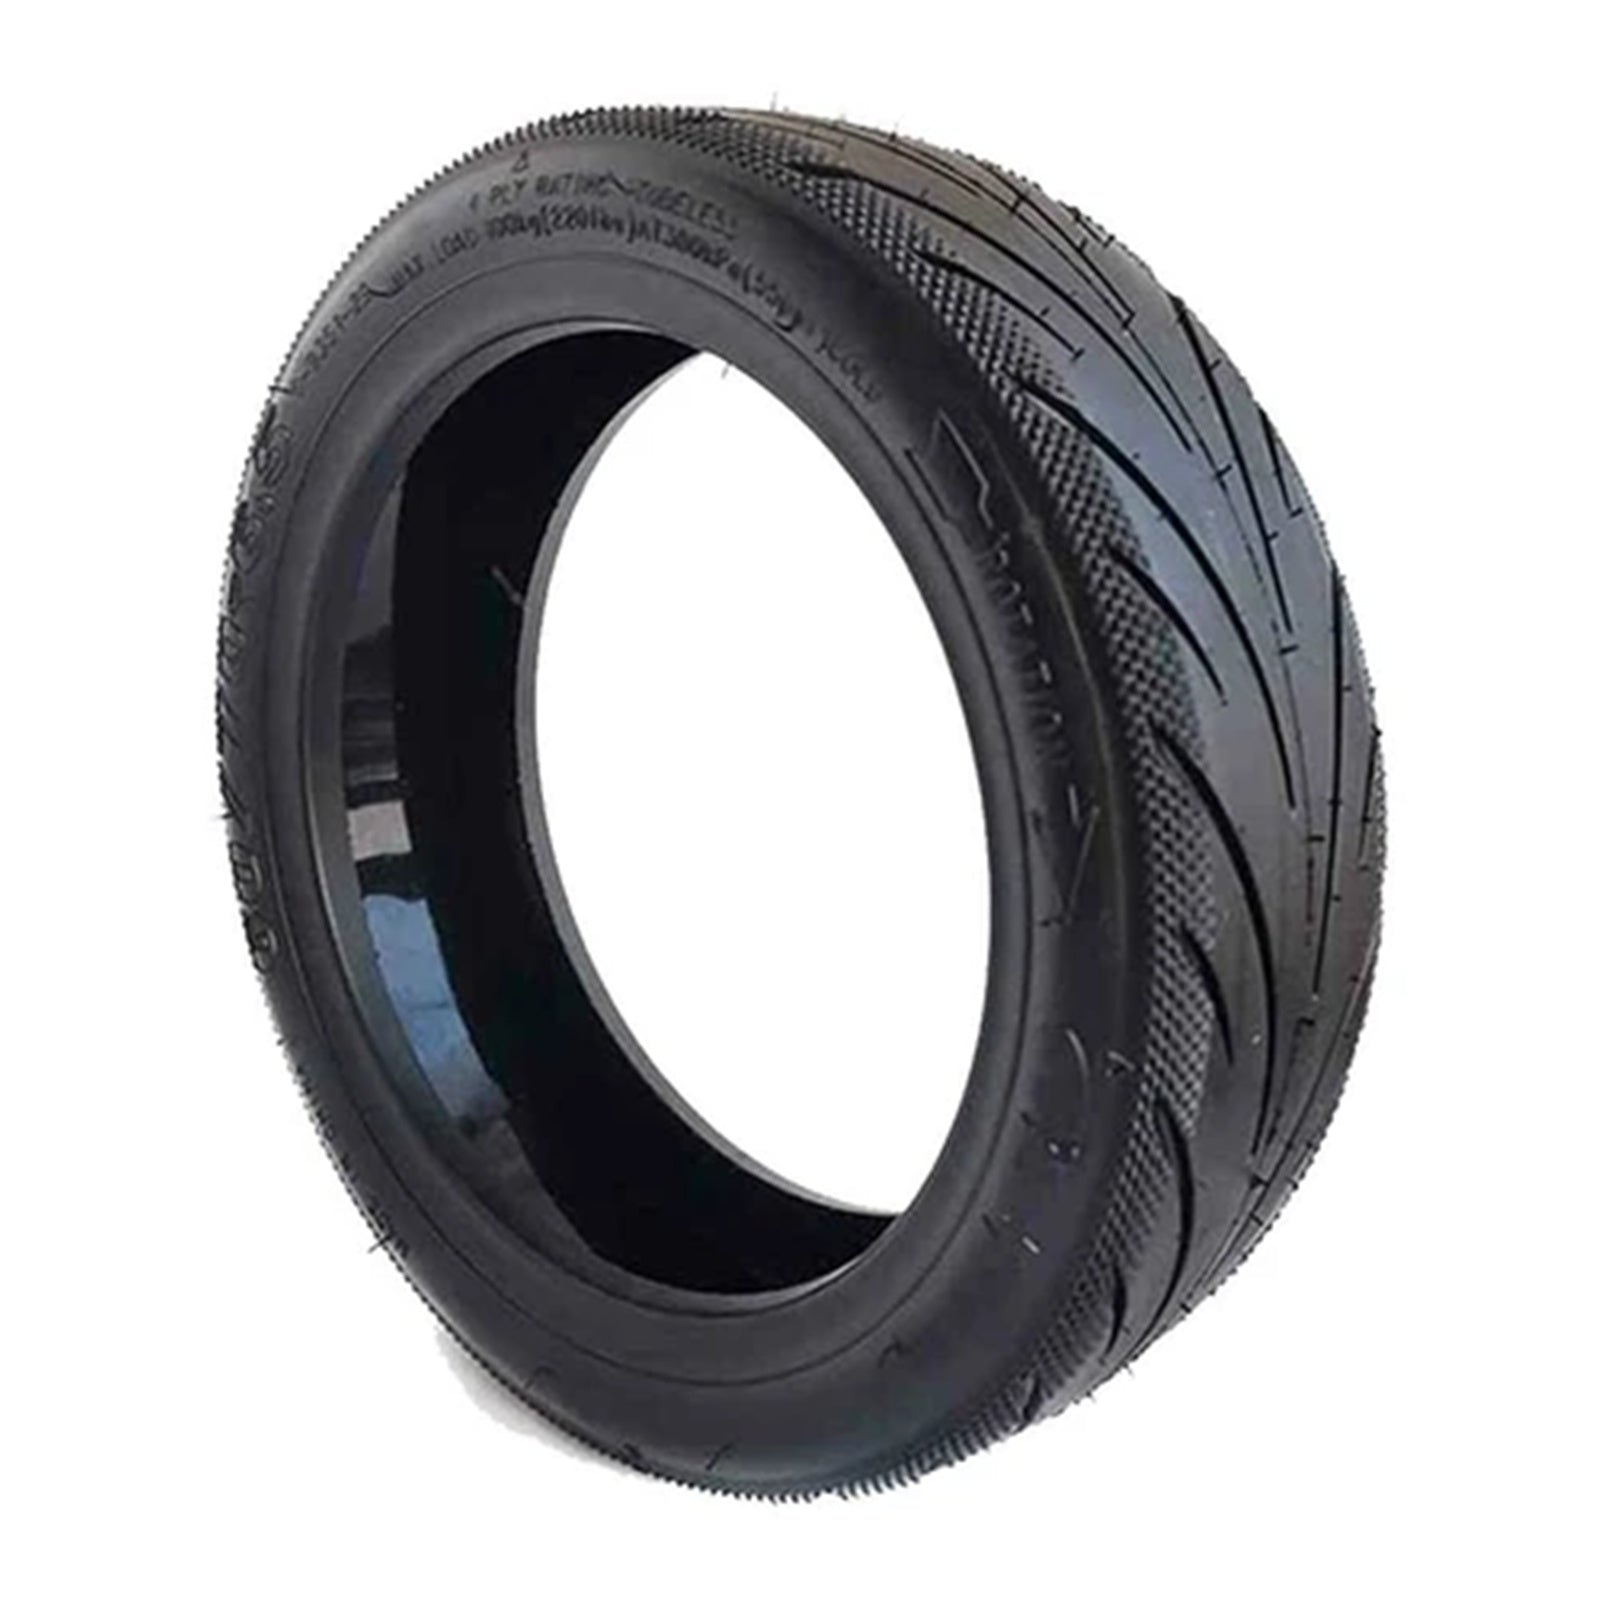 Spare Part - Original Flat-Prevention Inner Membrane Replacement Tire For Ninebot Max G30/G30L Kick Scooter